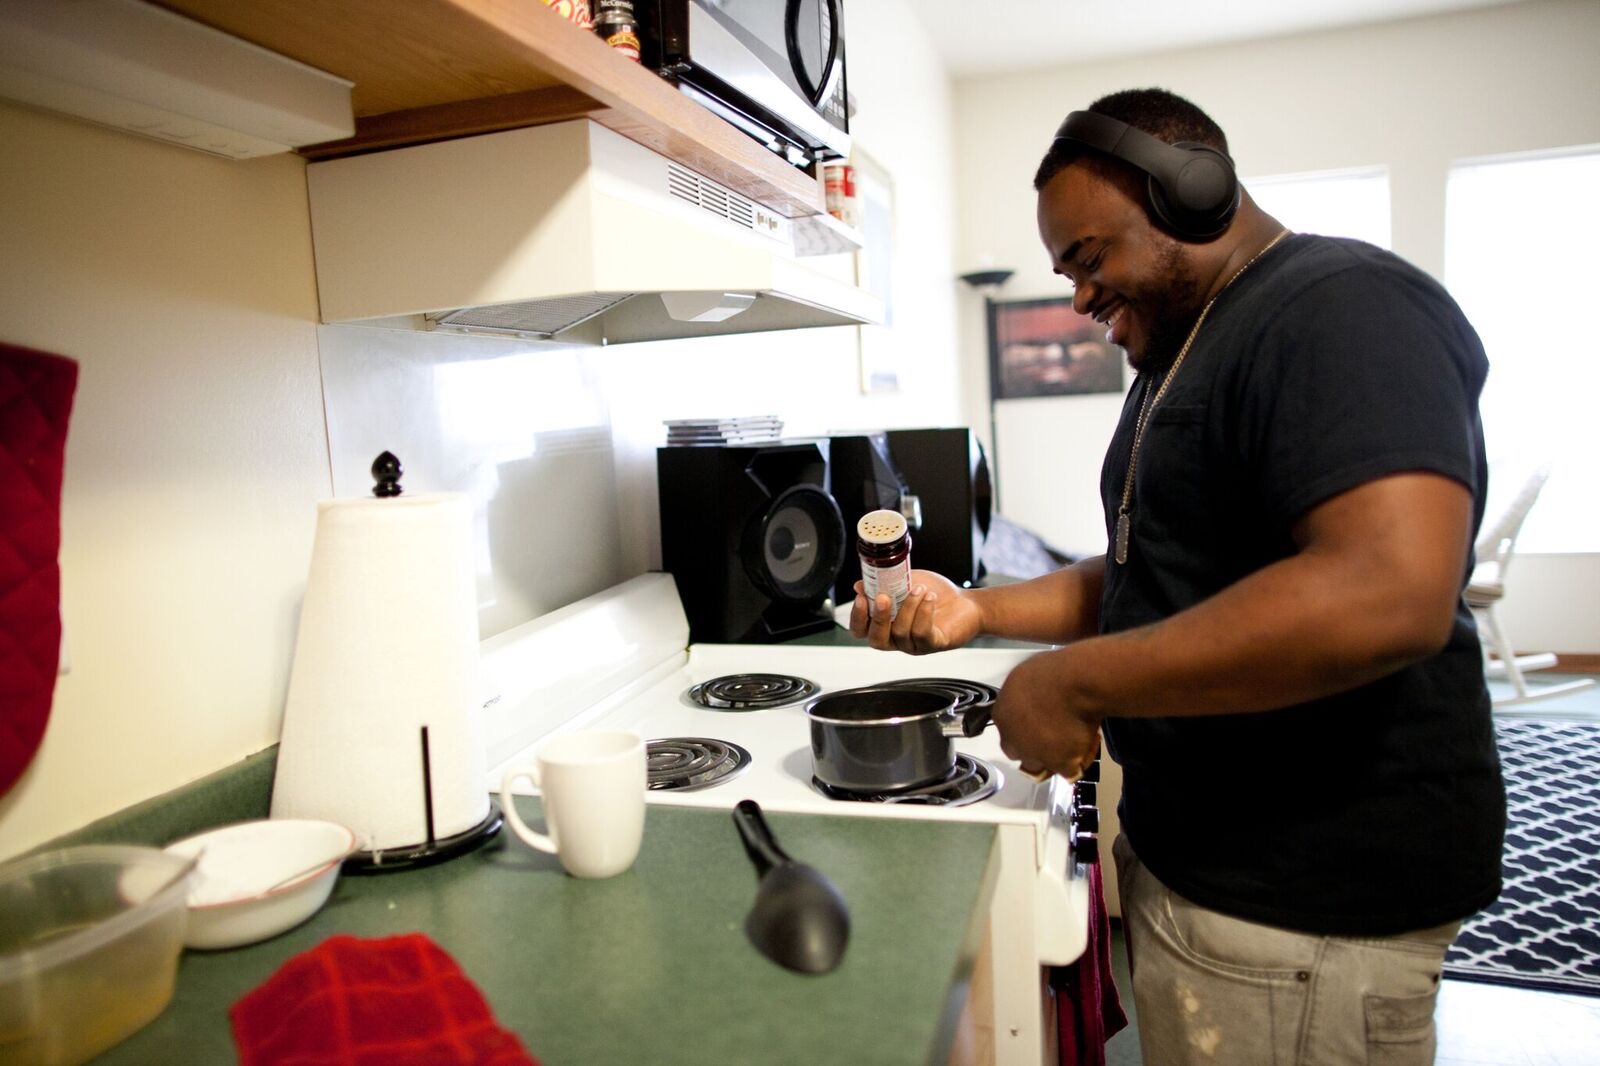 Smiling young adult wearing headphones cooking over a stove